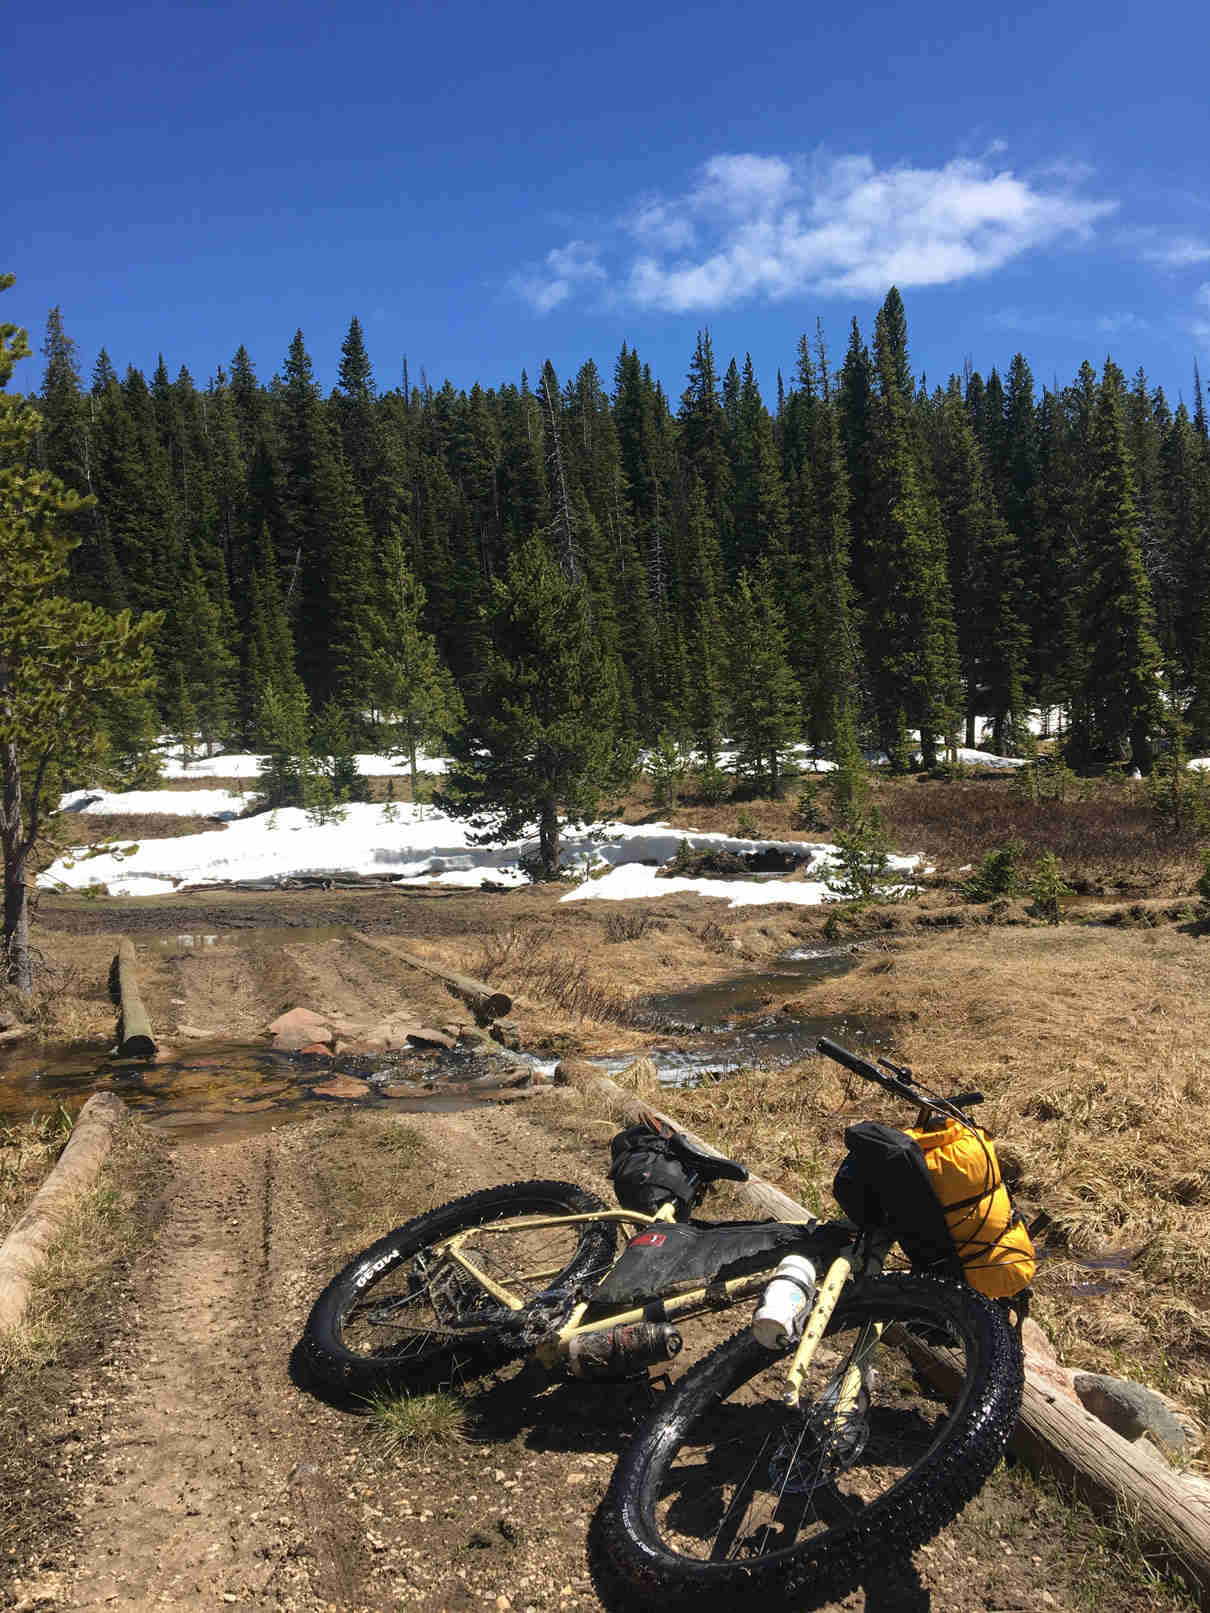 Front view of a Surly ECR bike laying on a gravel forest road, with pines and snow patches in the background